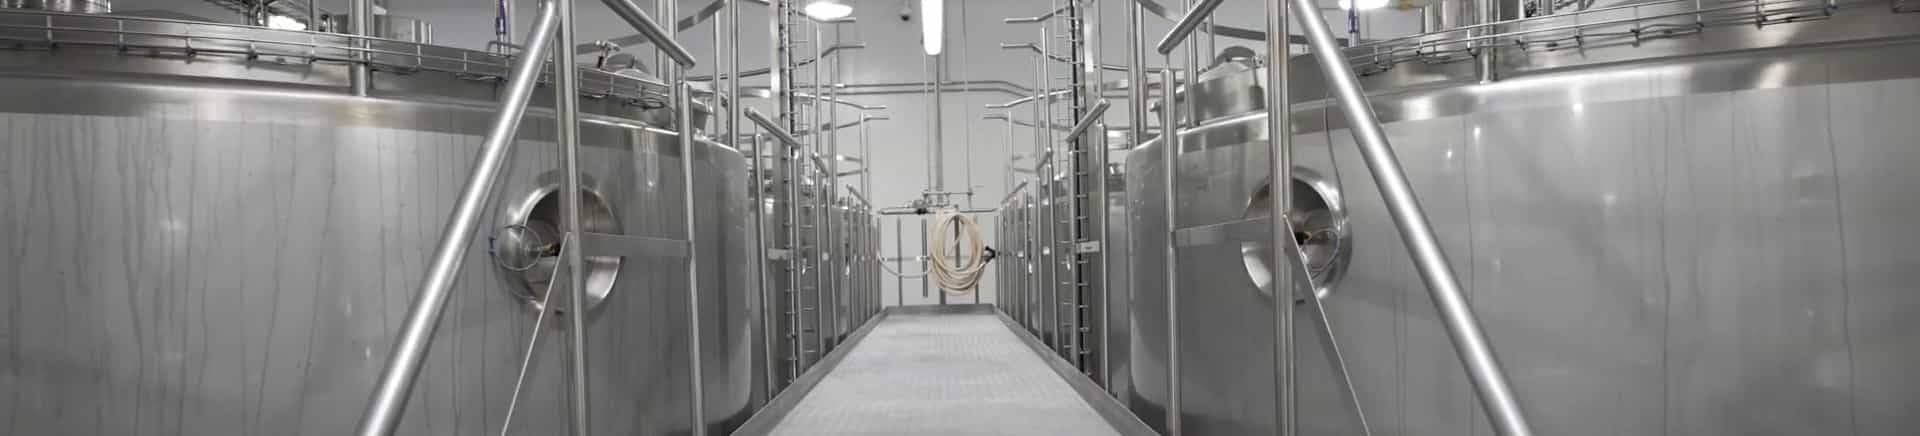 Inside a large milk manufacturing plant.